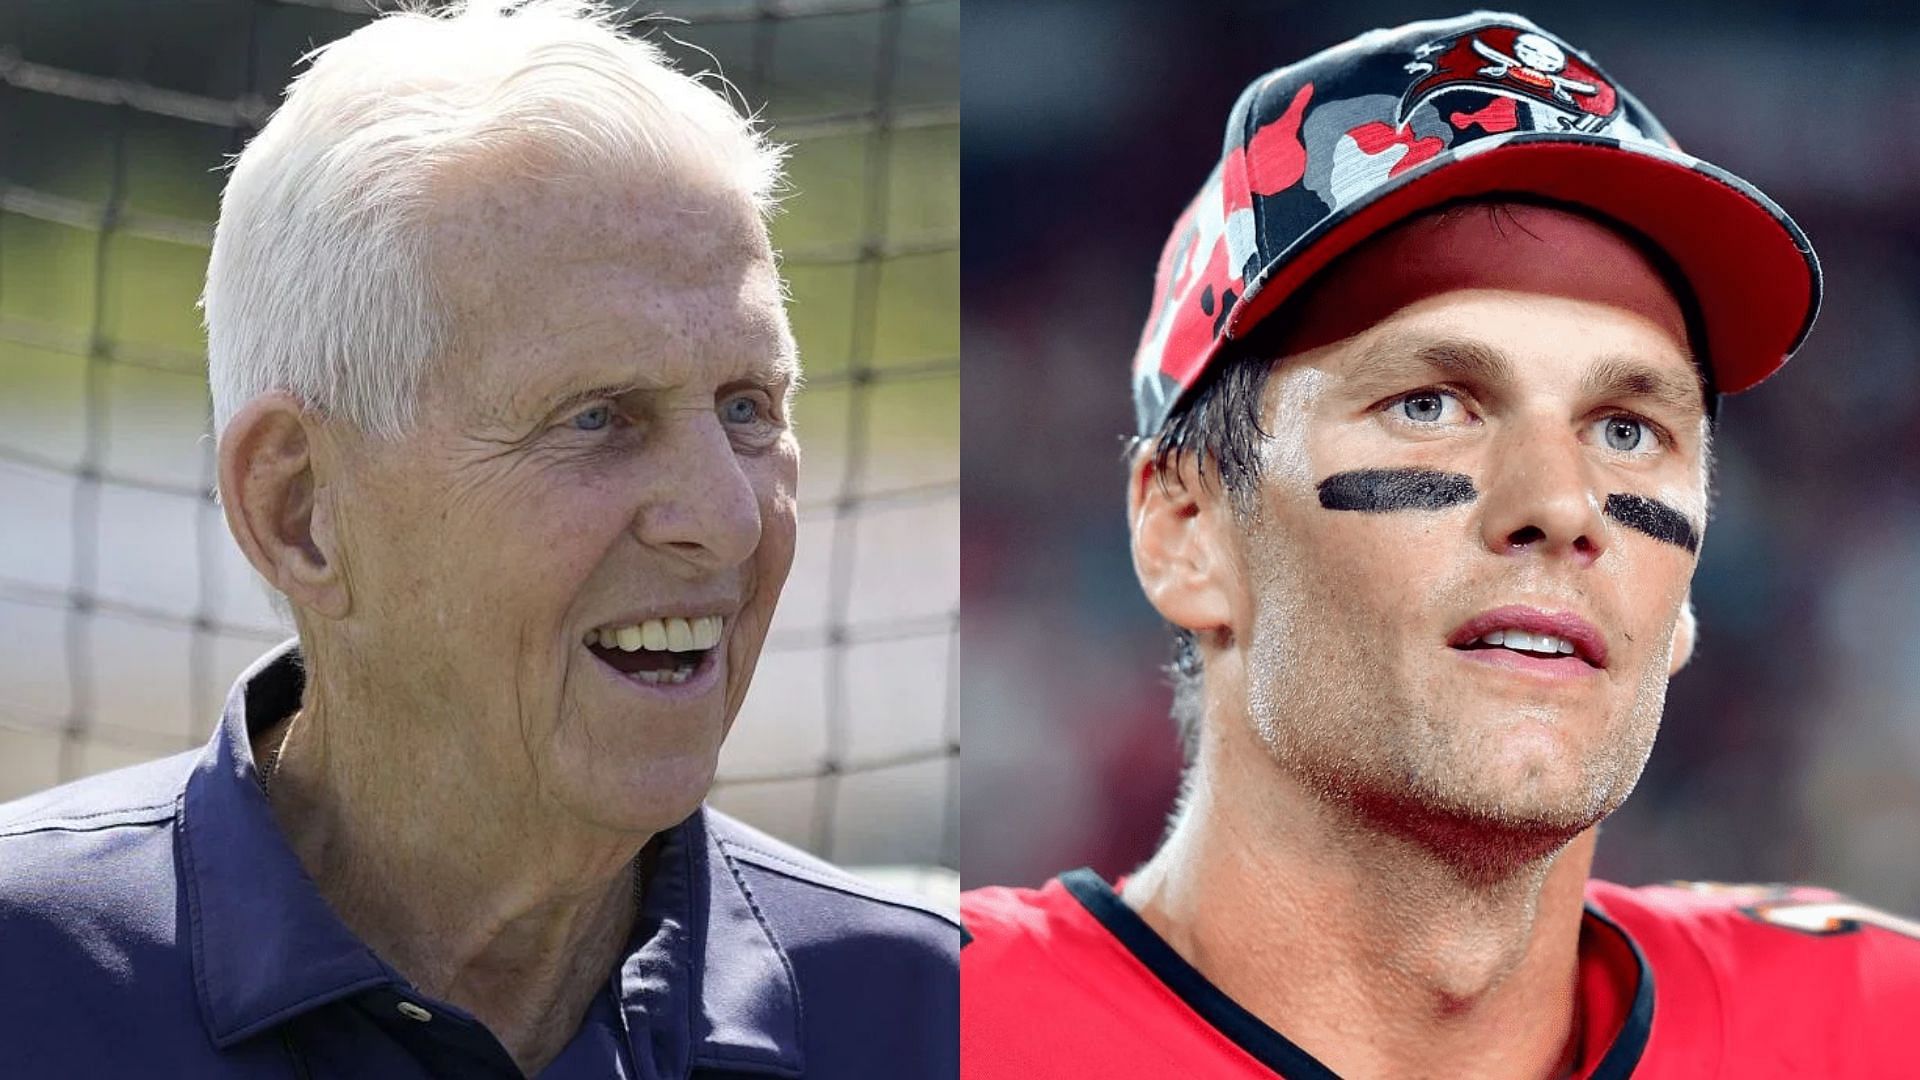 Former New York Jets head coach and general manager Bill Parcells confirmed that no one brought up Tom Brady